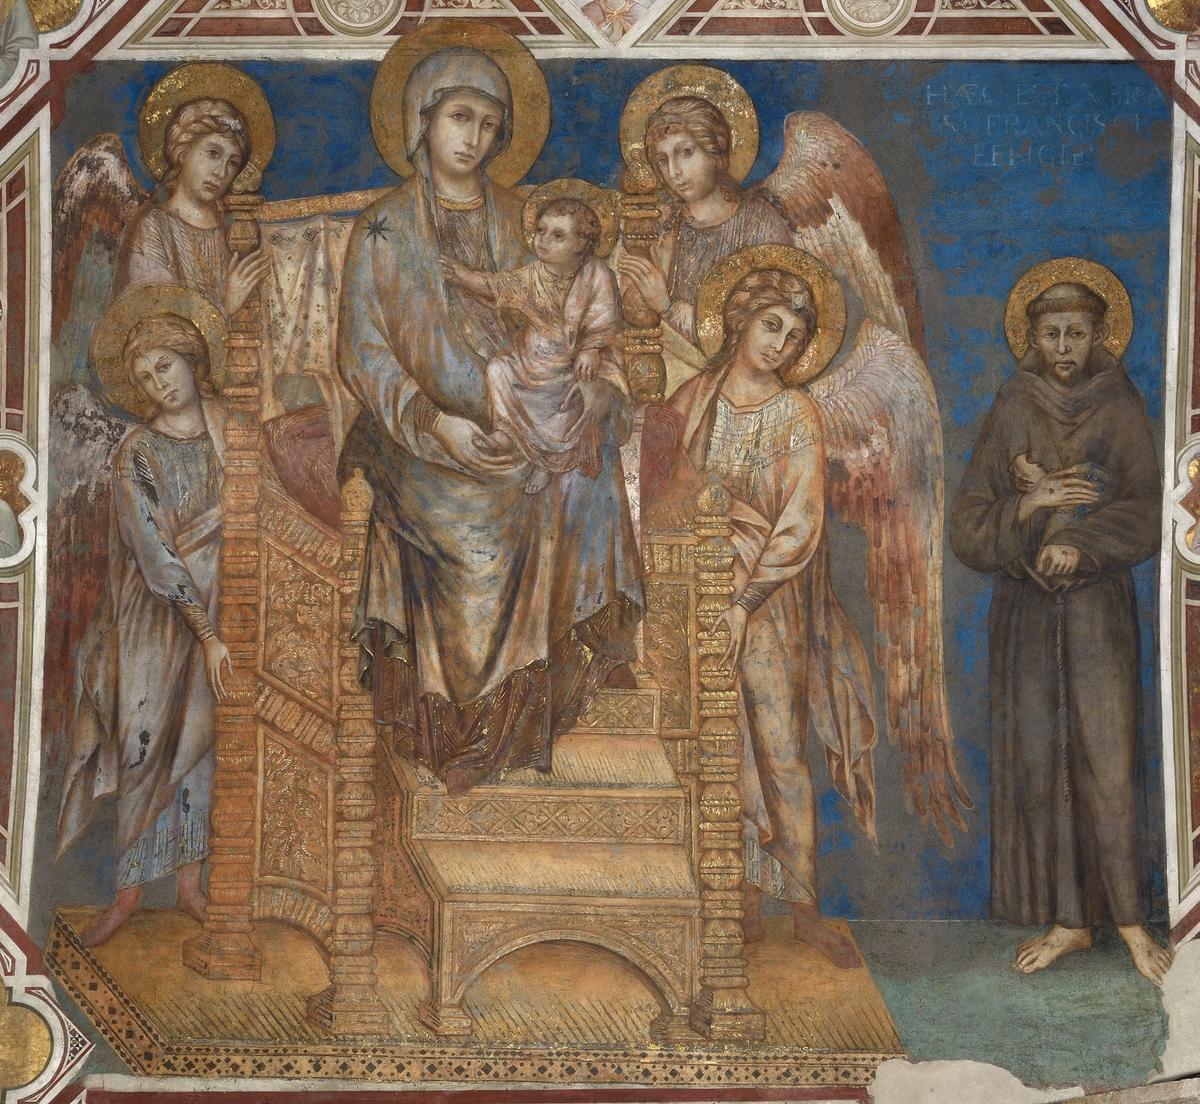 Cimabue’s Madonna Enthroned with the Child, Four Angels and St Francis underwent two previous restorations: in the late 19th century and again in 1973  Tecnireco